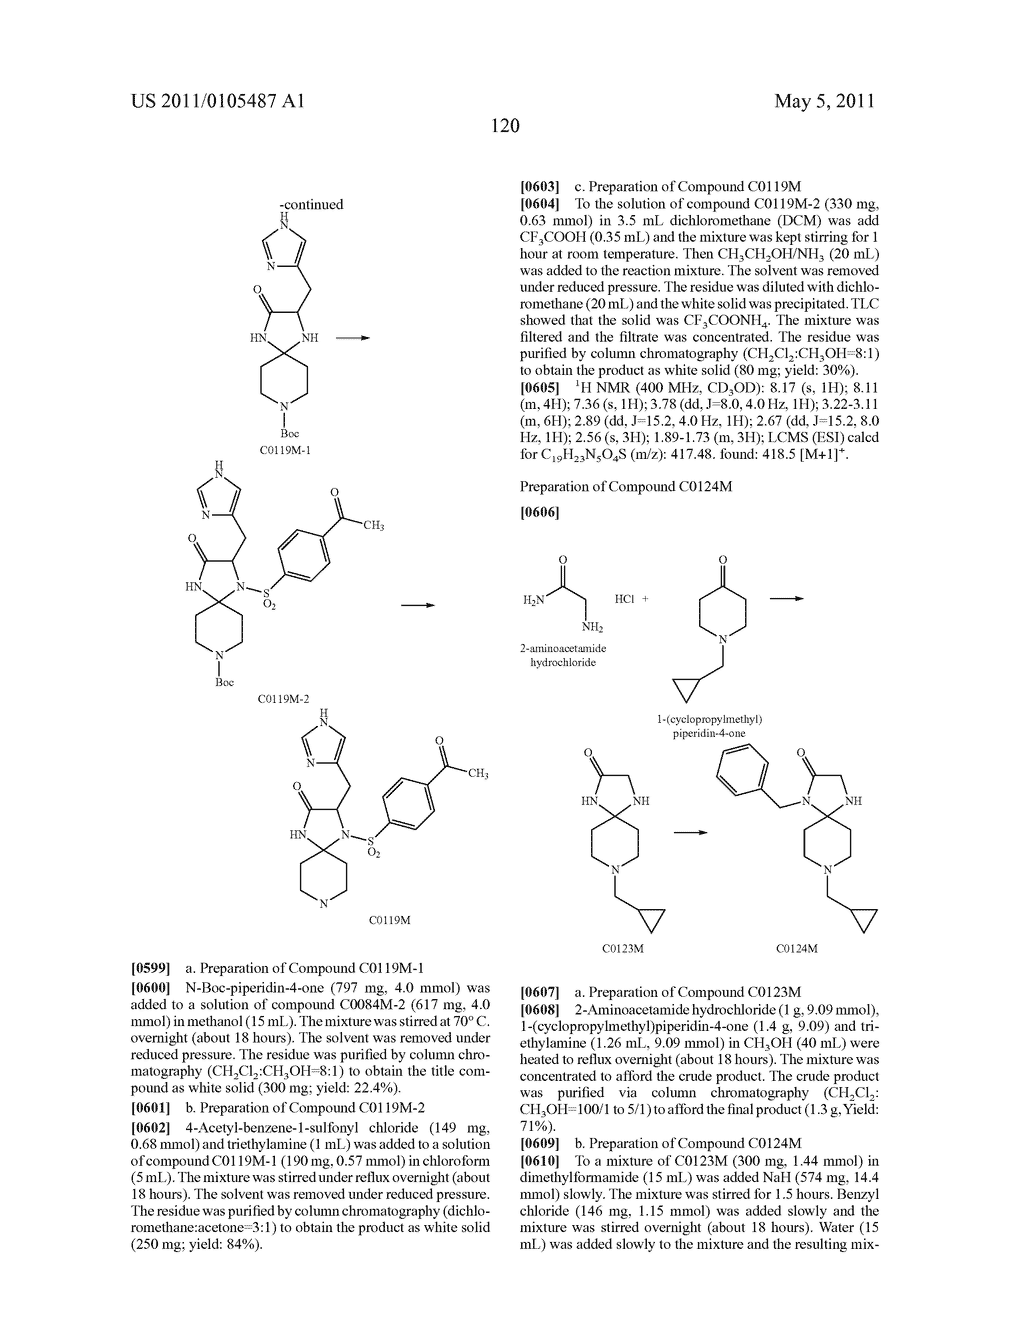 FILAMIN A BINDING ANTI-INFLAMMATORY AND ANALGESIC - diagram, schematic, and image 121